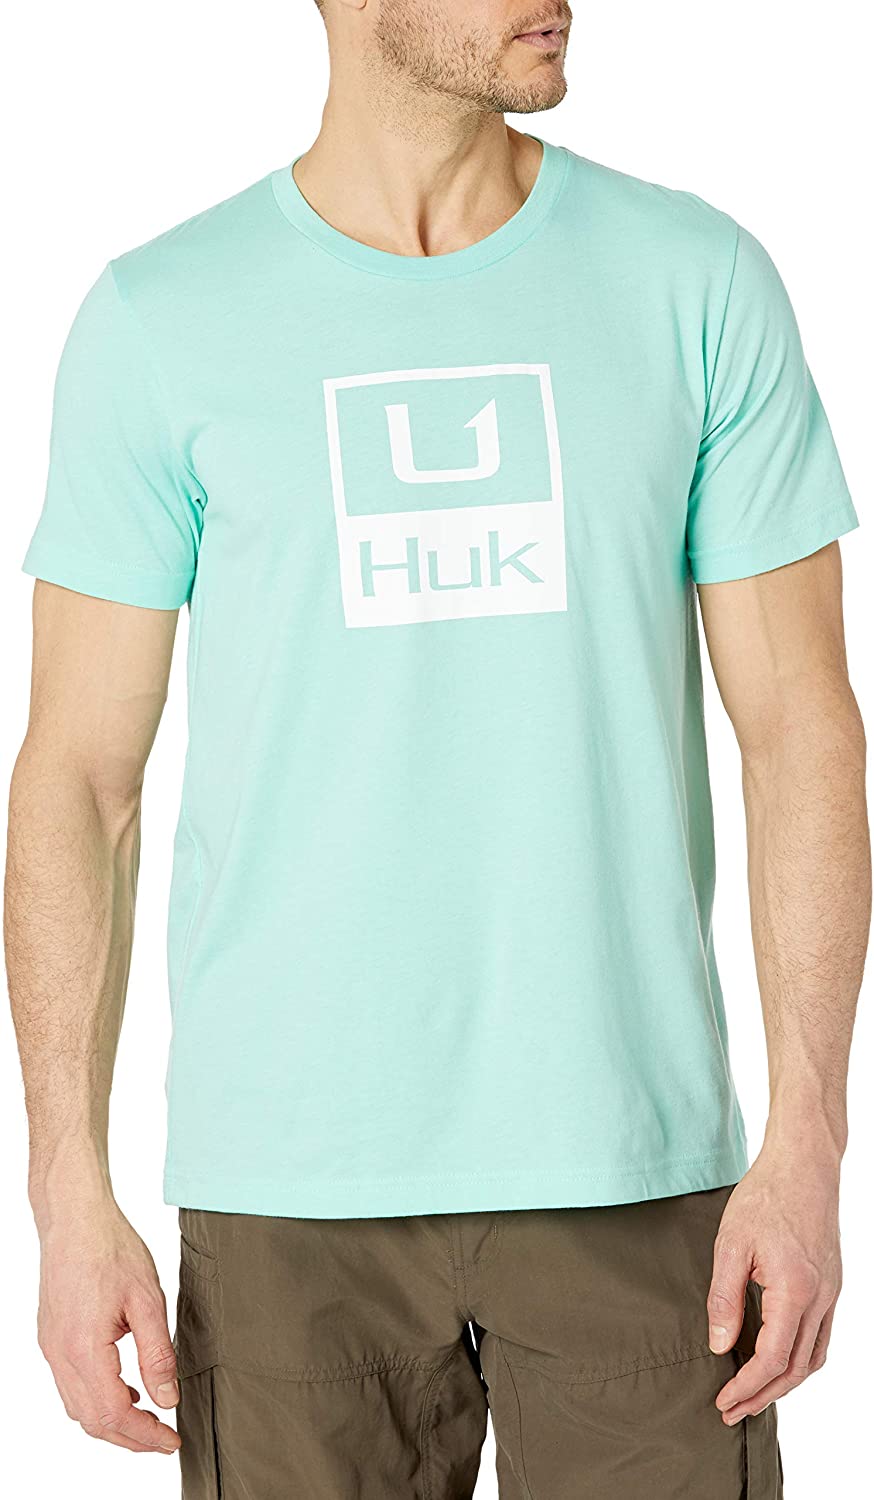 Men's Huk Huk'd Up Performance Tee in Seafoam Heather from the front